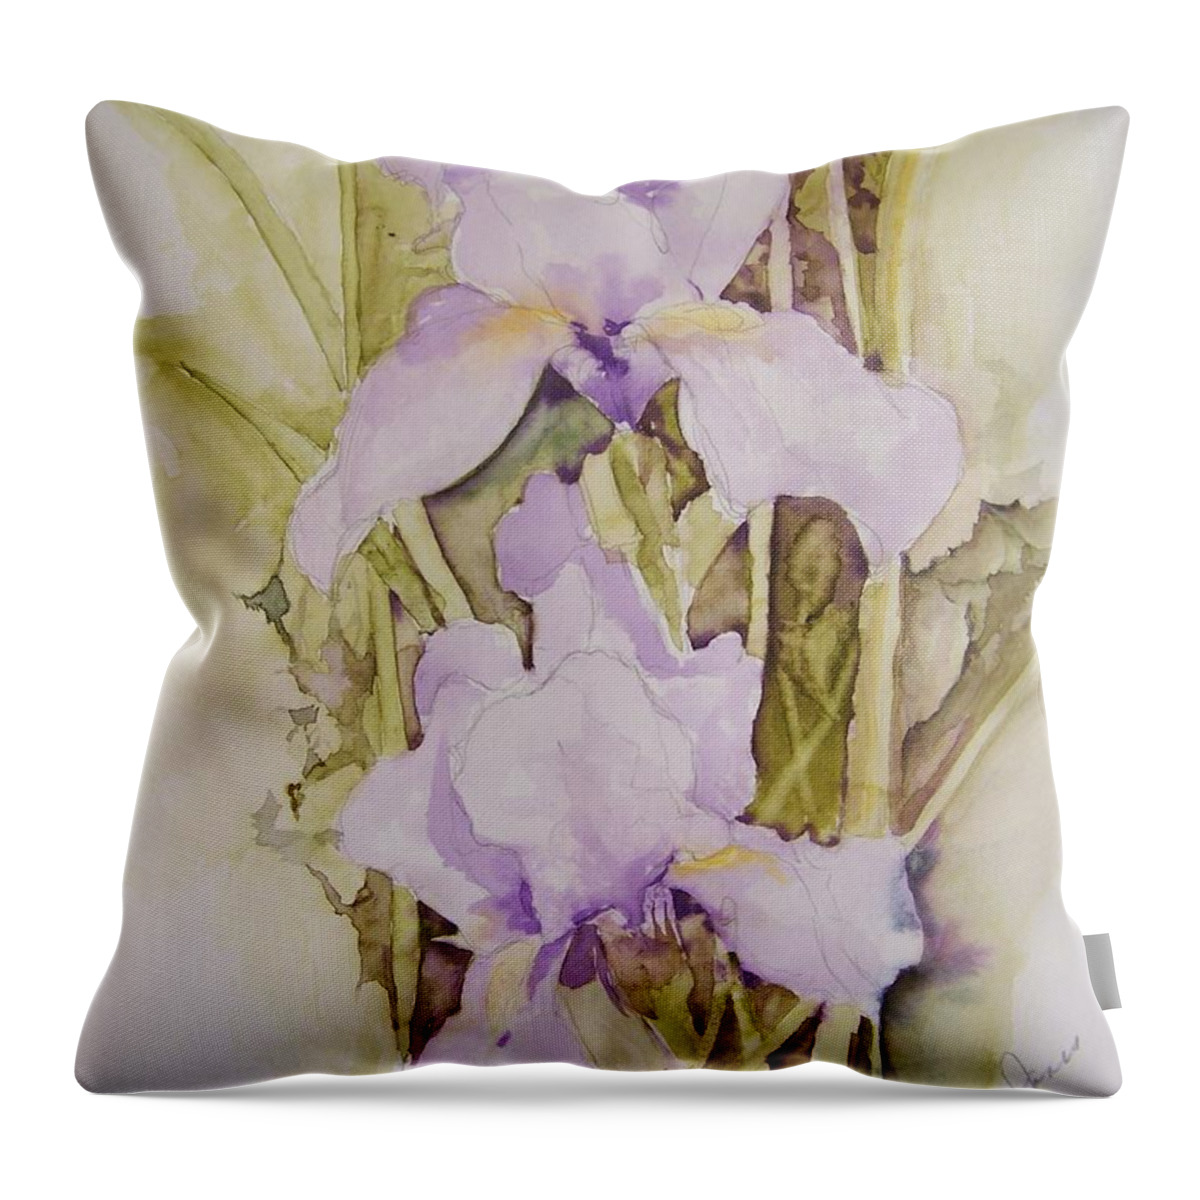 Irises Throw Pillow featuring the painting Irises by Jackie Mueller-Jones